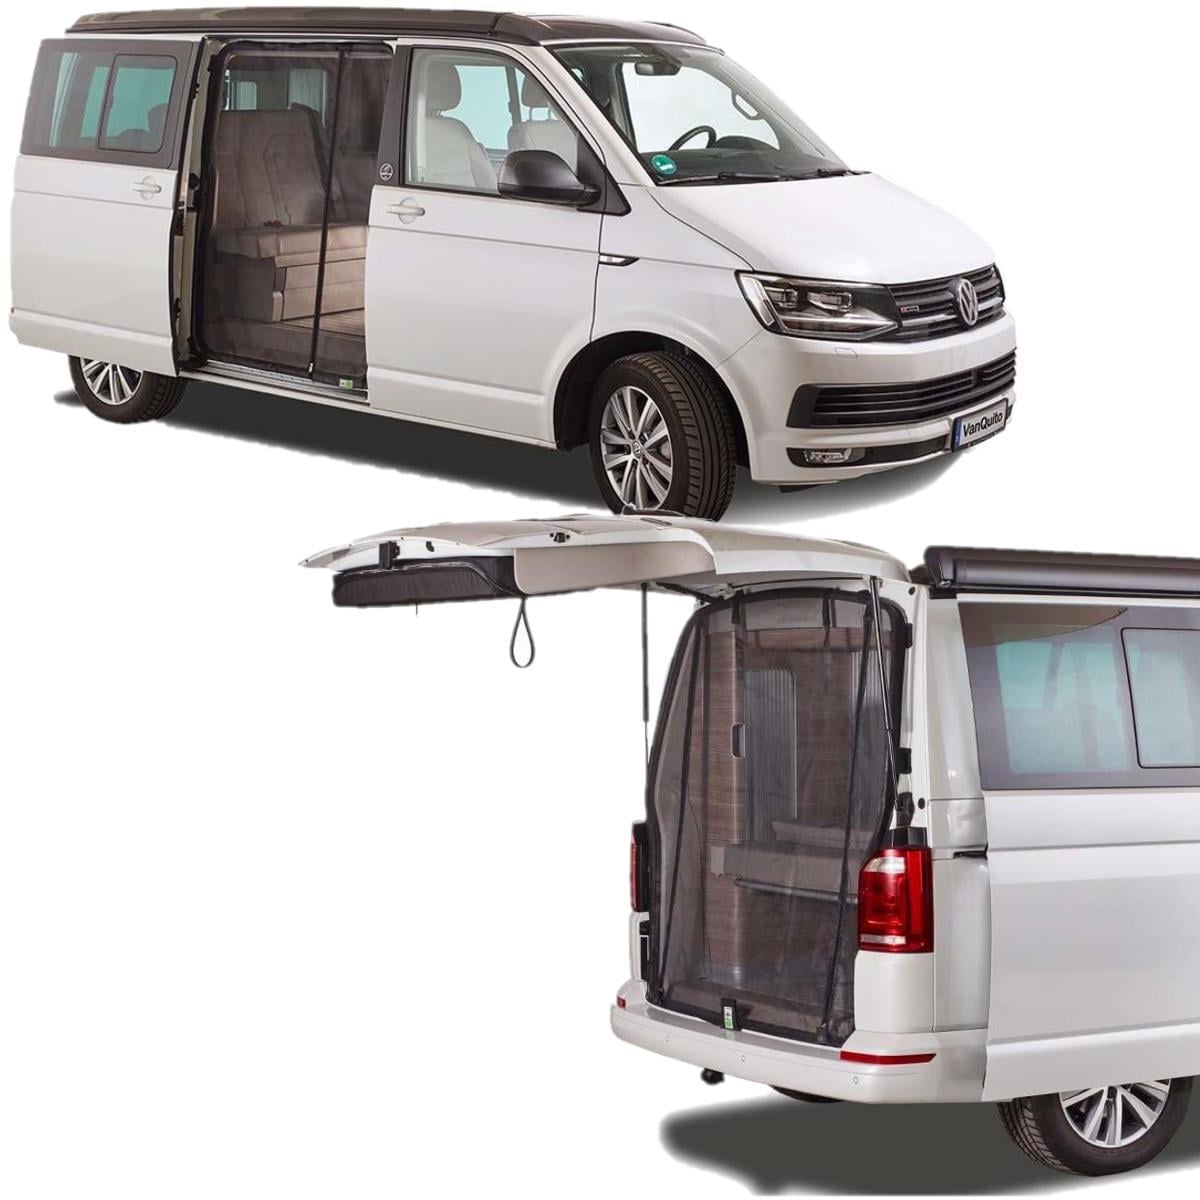 Mayr VanQuito Set für VW T5/T6 feinmaschiges Moskitonetz - Camping Wagner  Edition bei Camping Wagner Campingzubehör